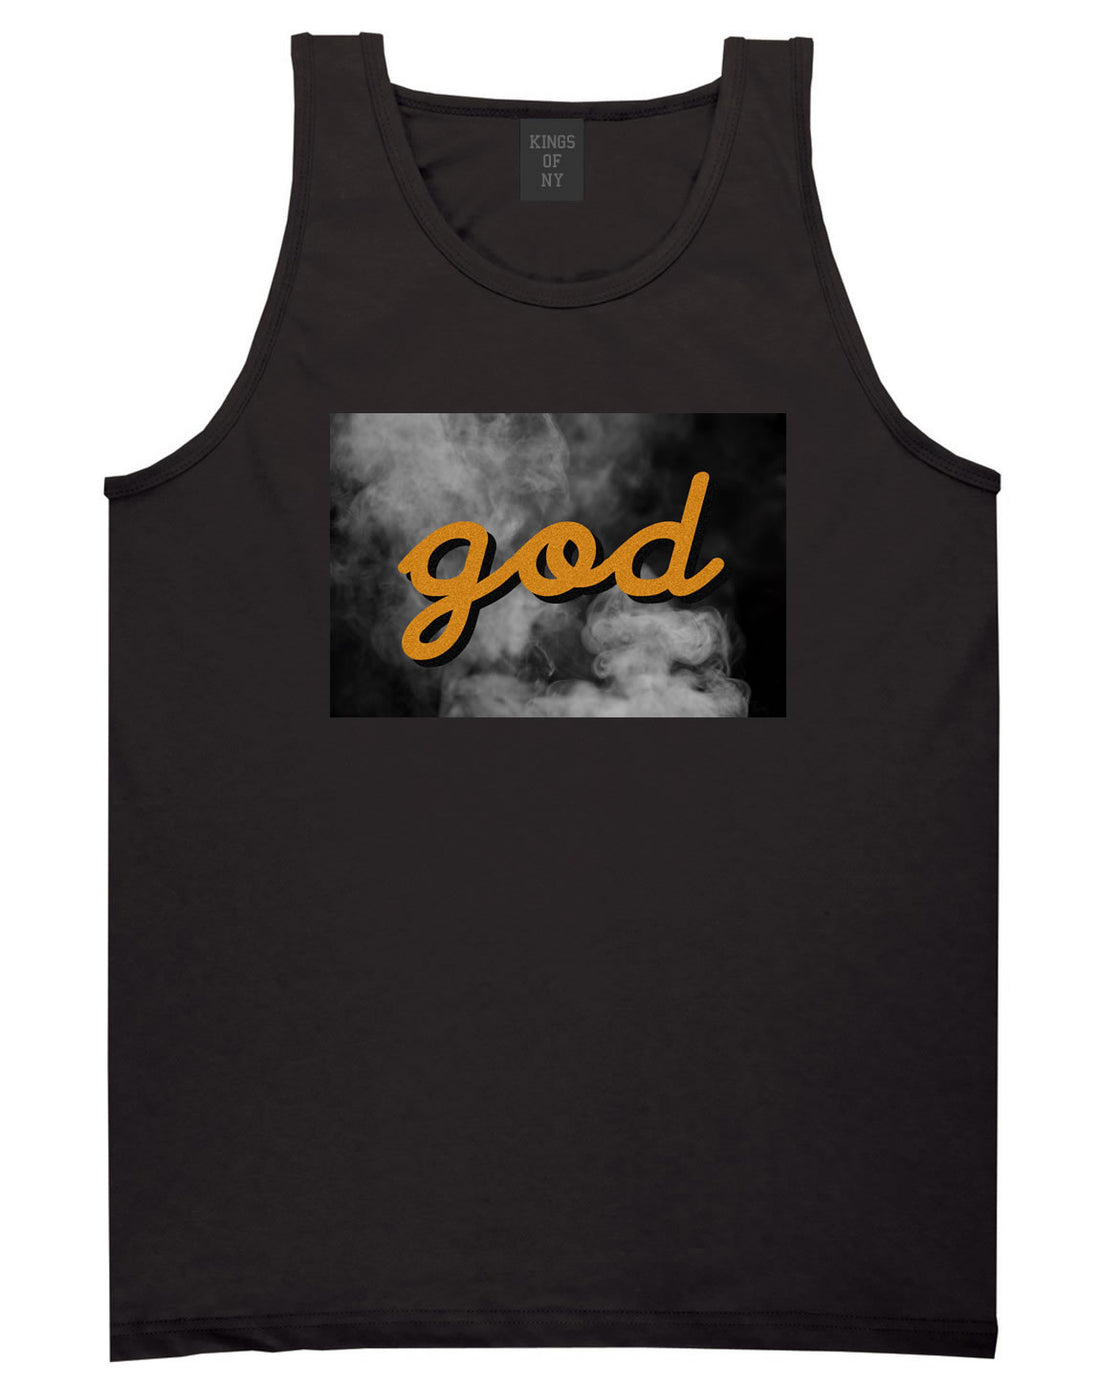 God Up In Smoke Puff Goth Dark Tank Top in Black By Kings Of NY